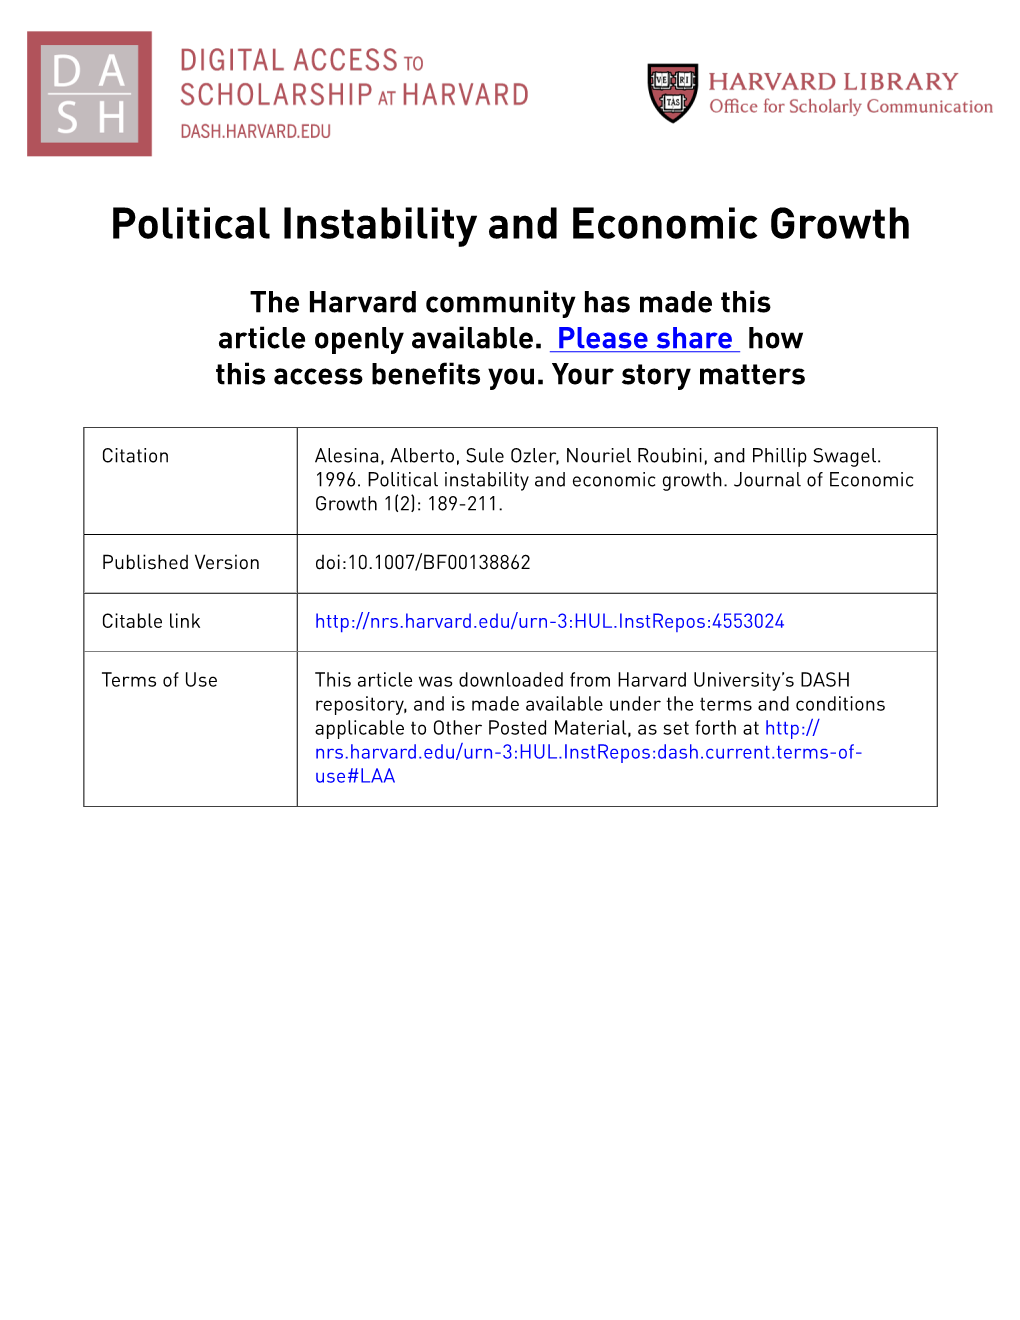 Political Instability and Economic Growth